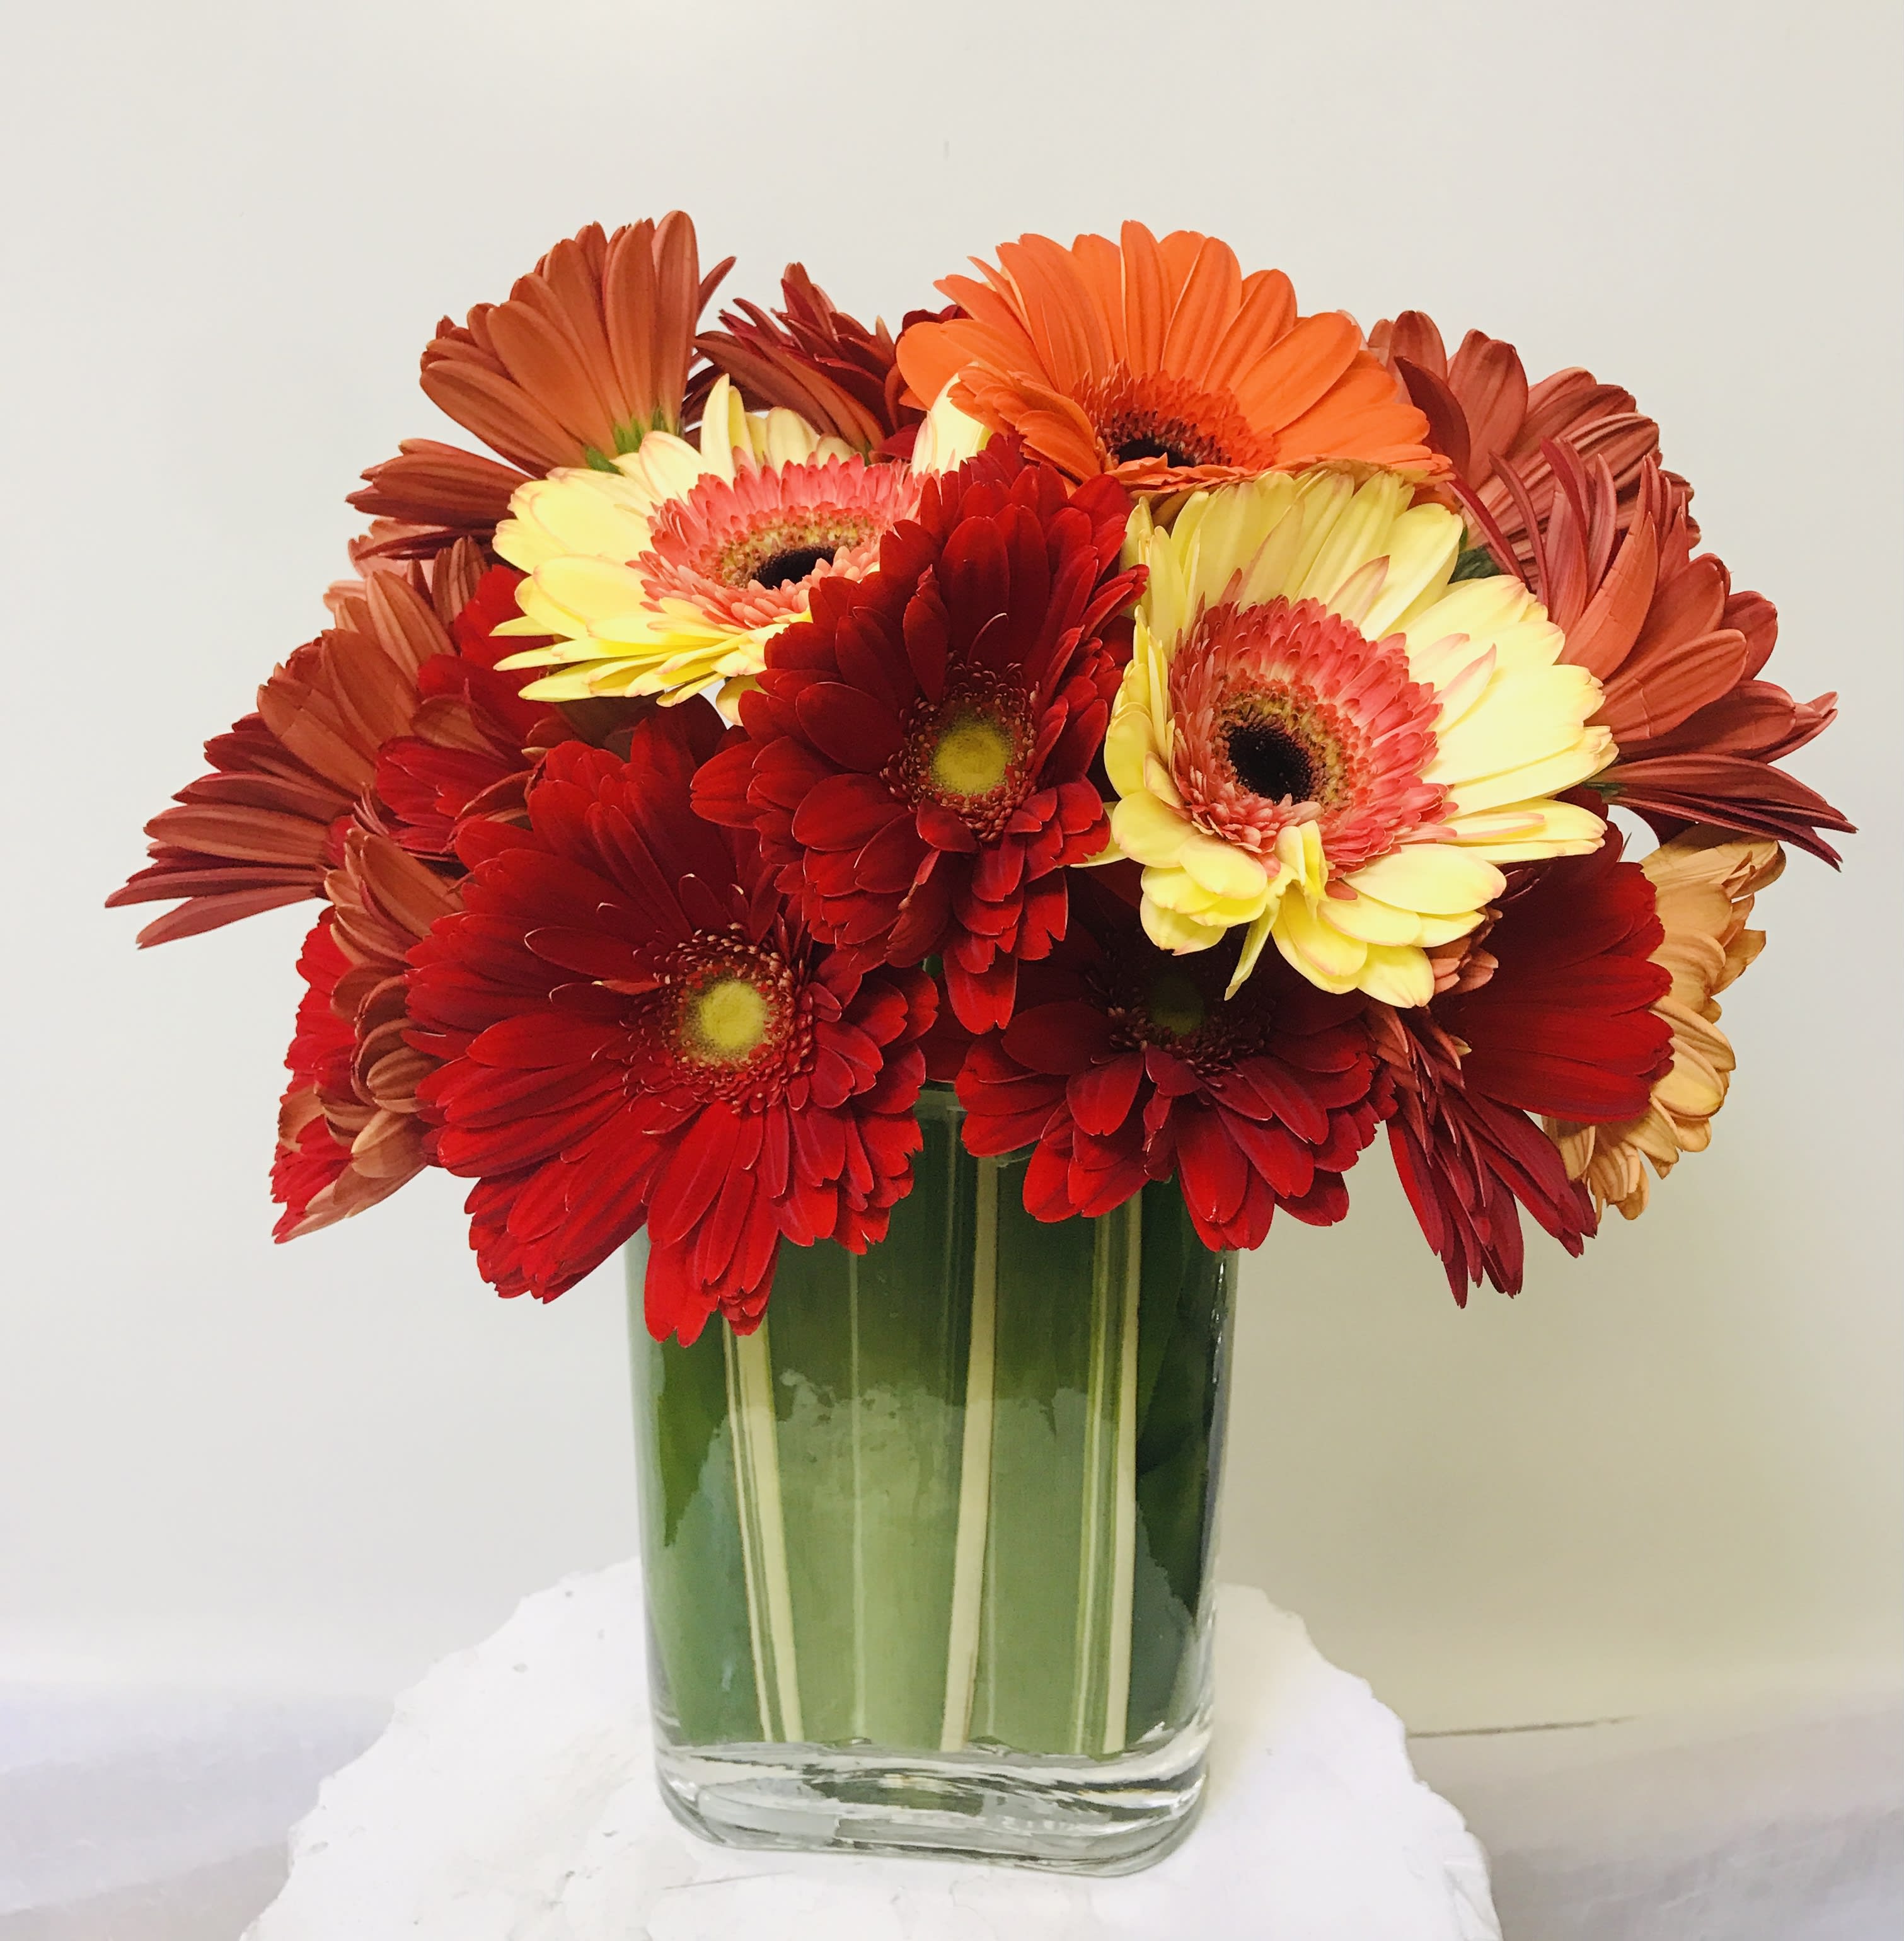 Green Book - in a glass vase with a nice green leaf inside 15 different colors of gerberas 